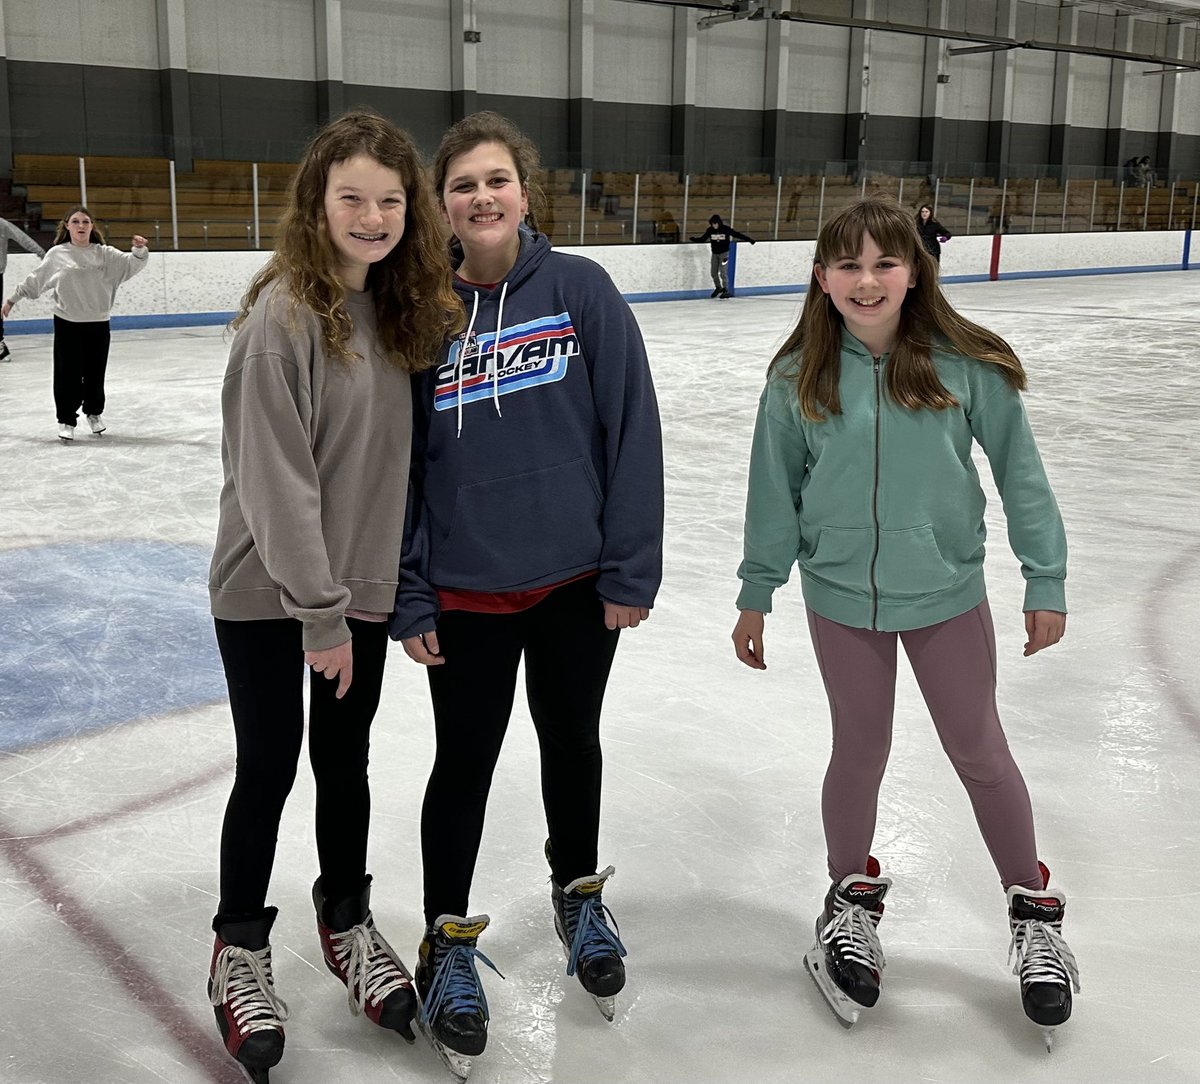 Spins, stumbles, and lots of smiles on the skating rink!! 7Sapphire had a blast!⛸️@PPMS_SDE